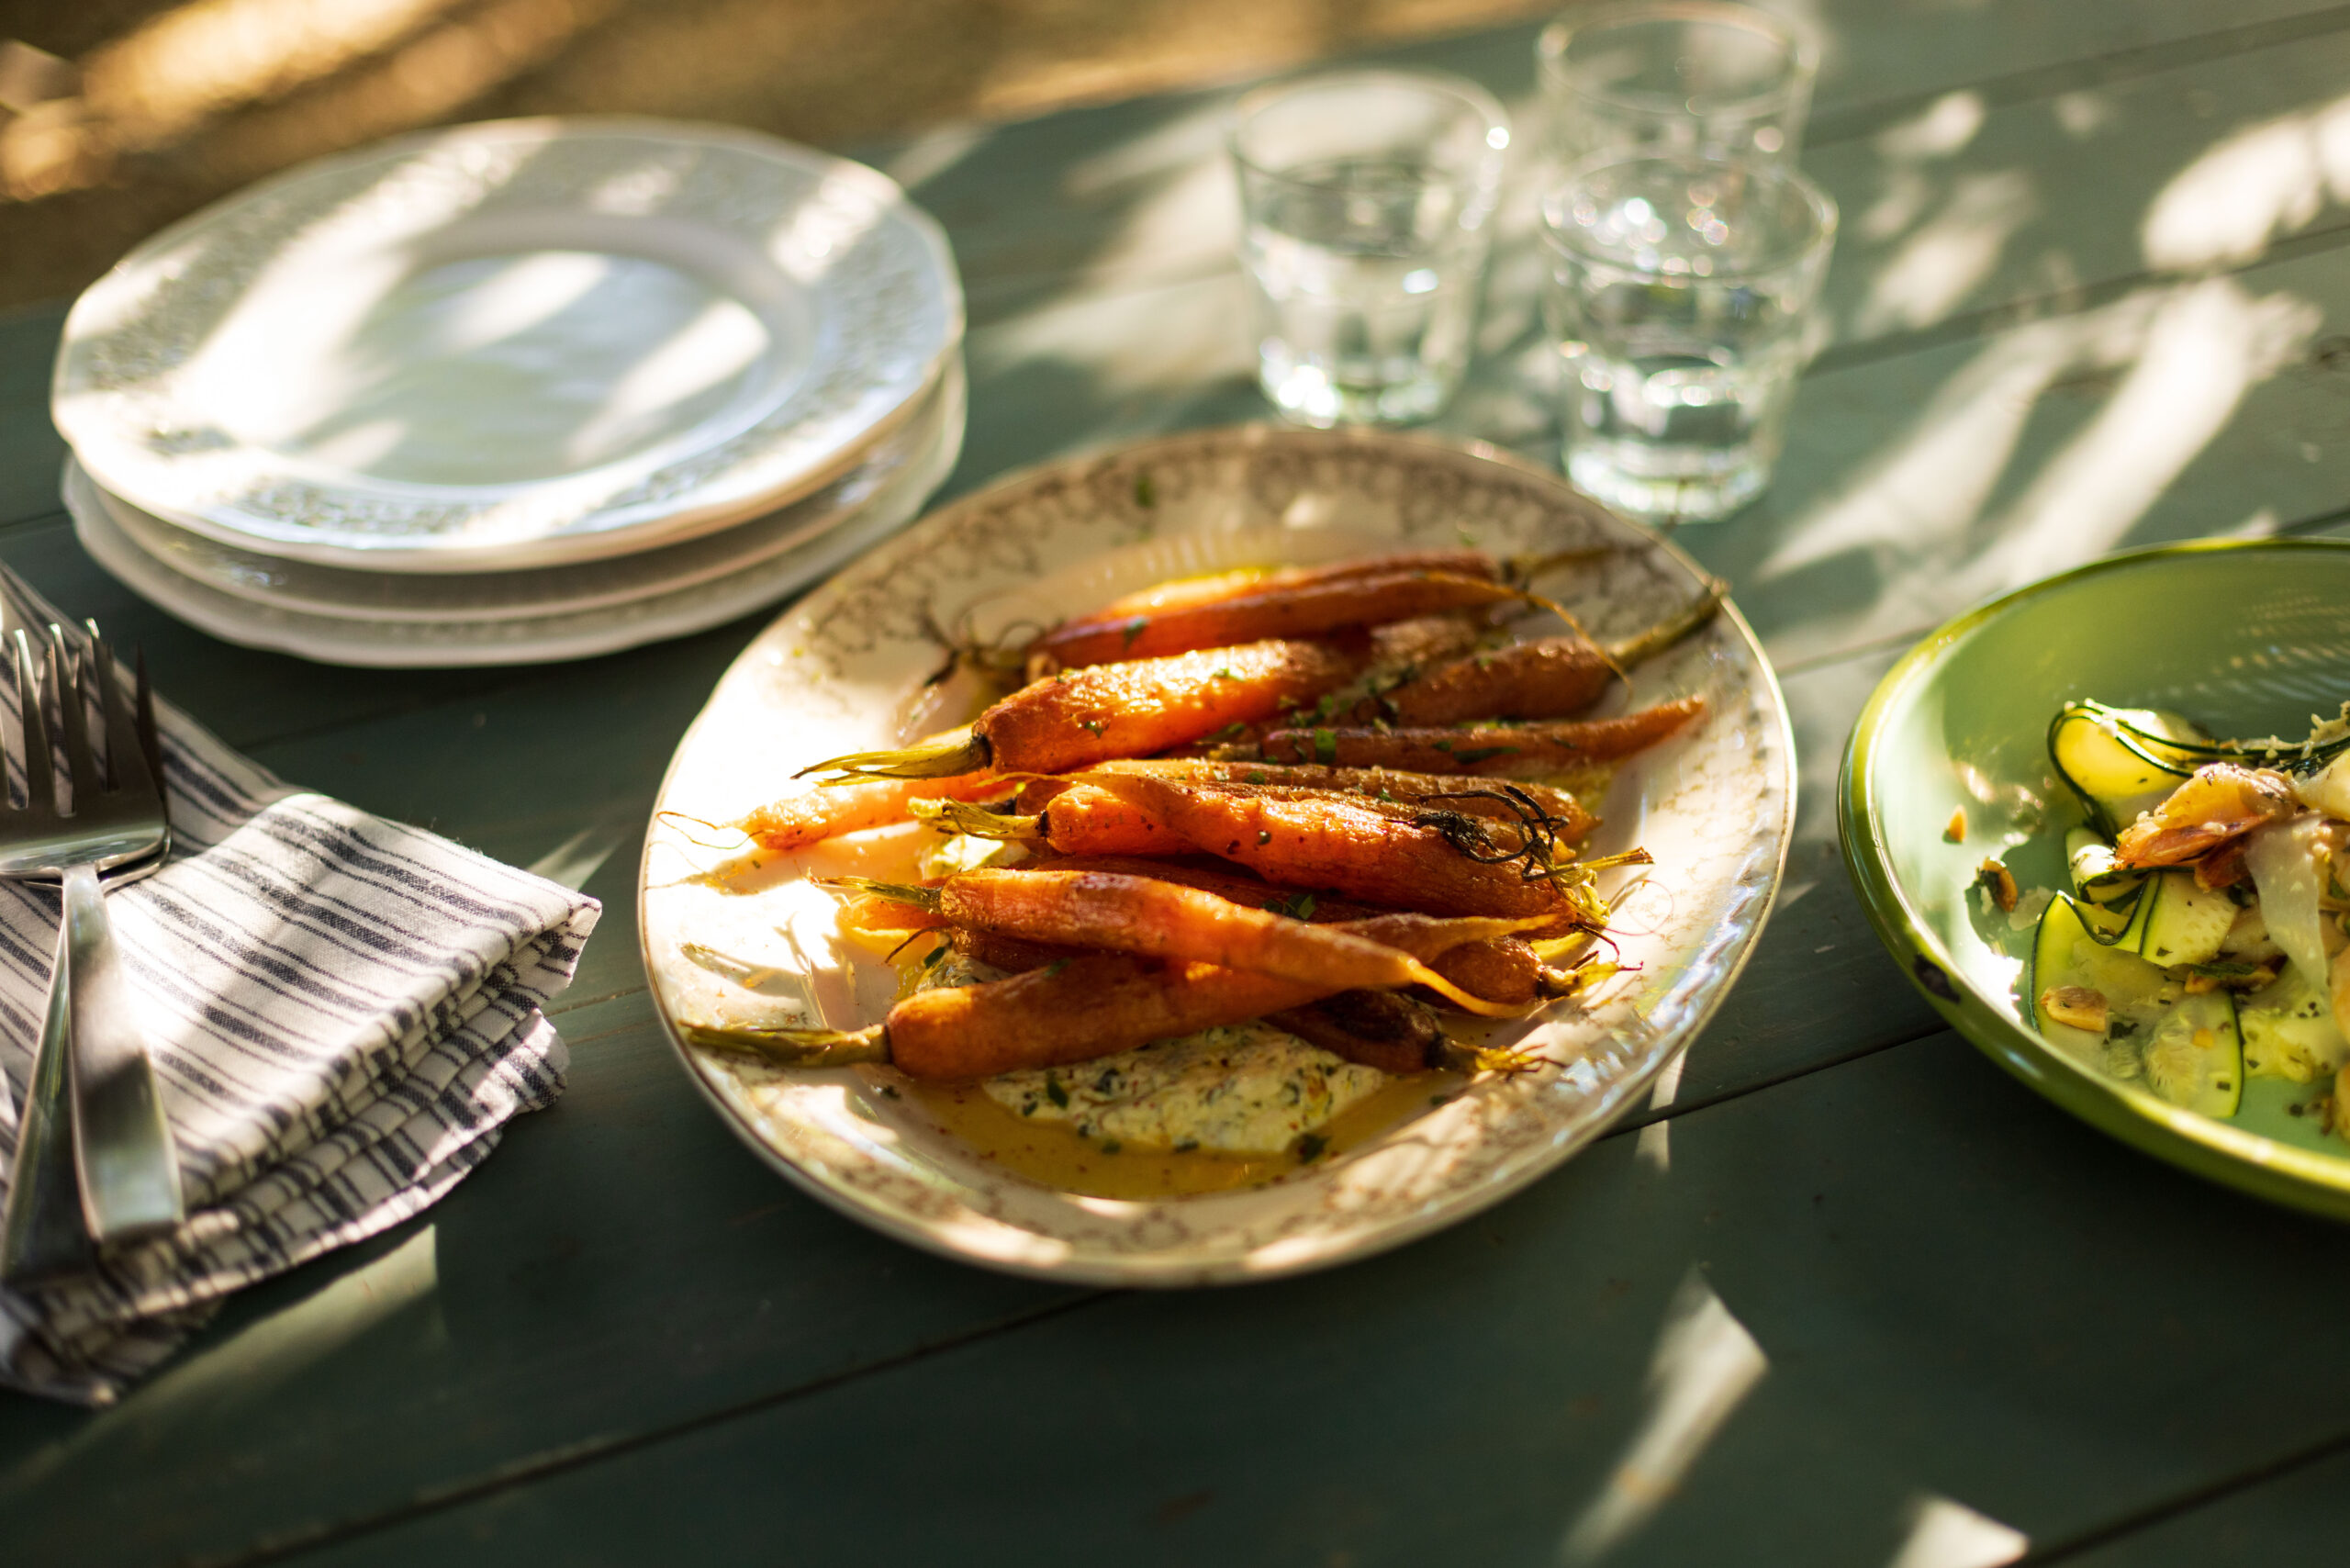 Field Day’s Honey-Roasted Carrots With Spiced Labneh and Herbs. (Conor Hagen)